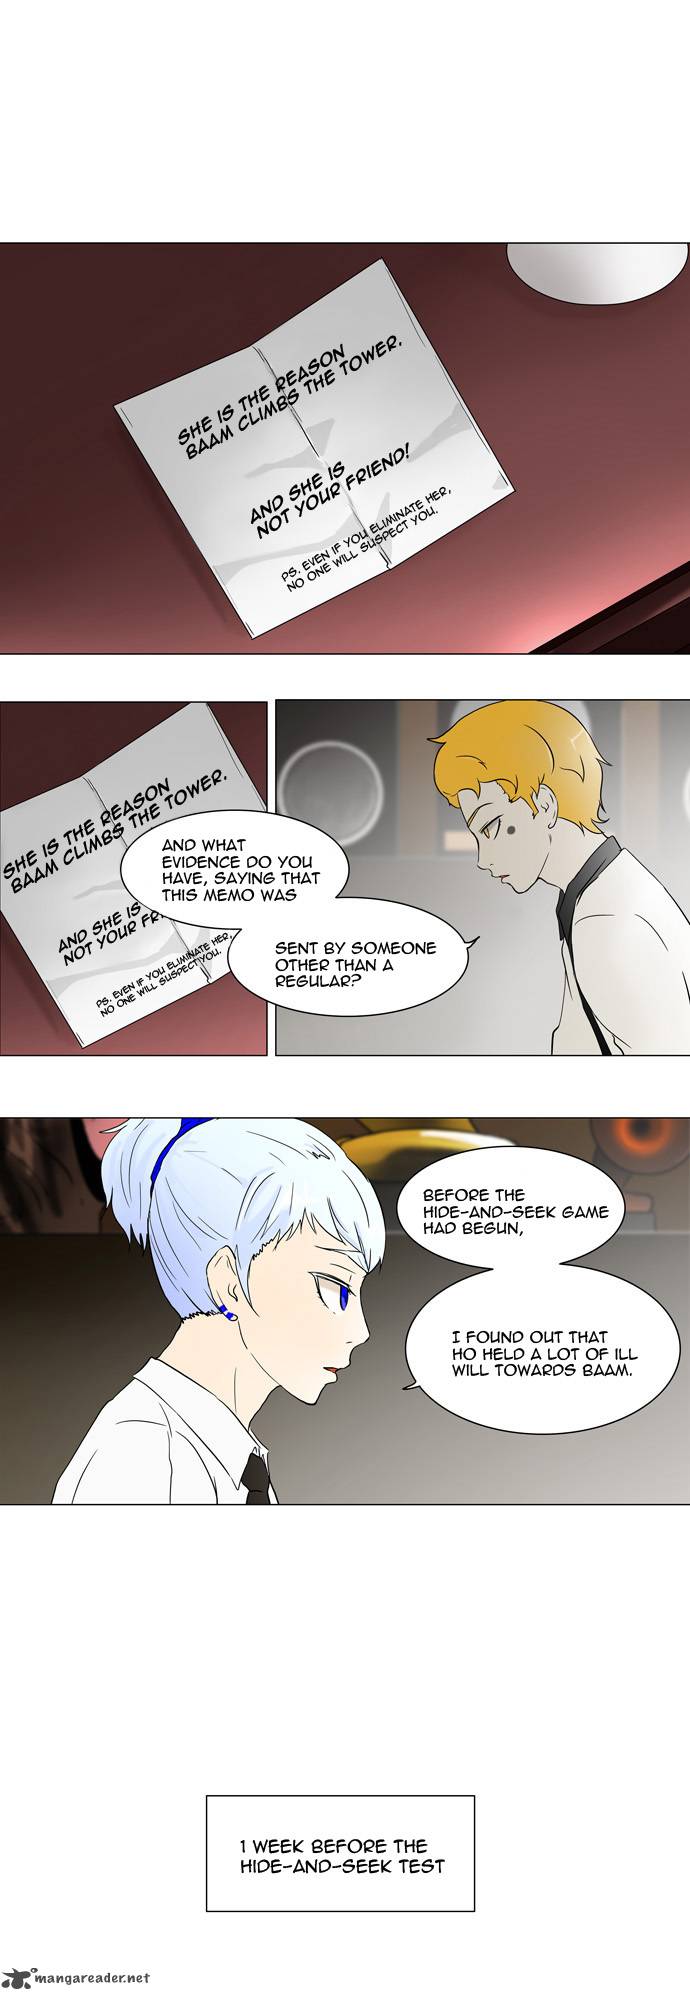 Tower Of God 55 6